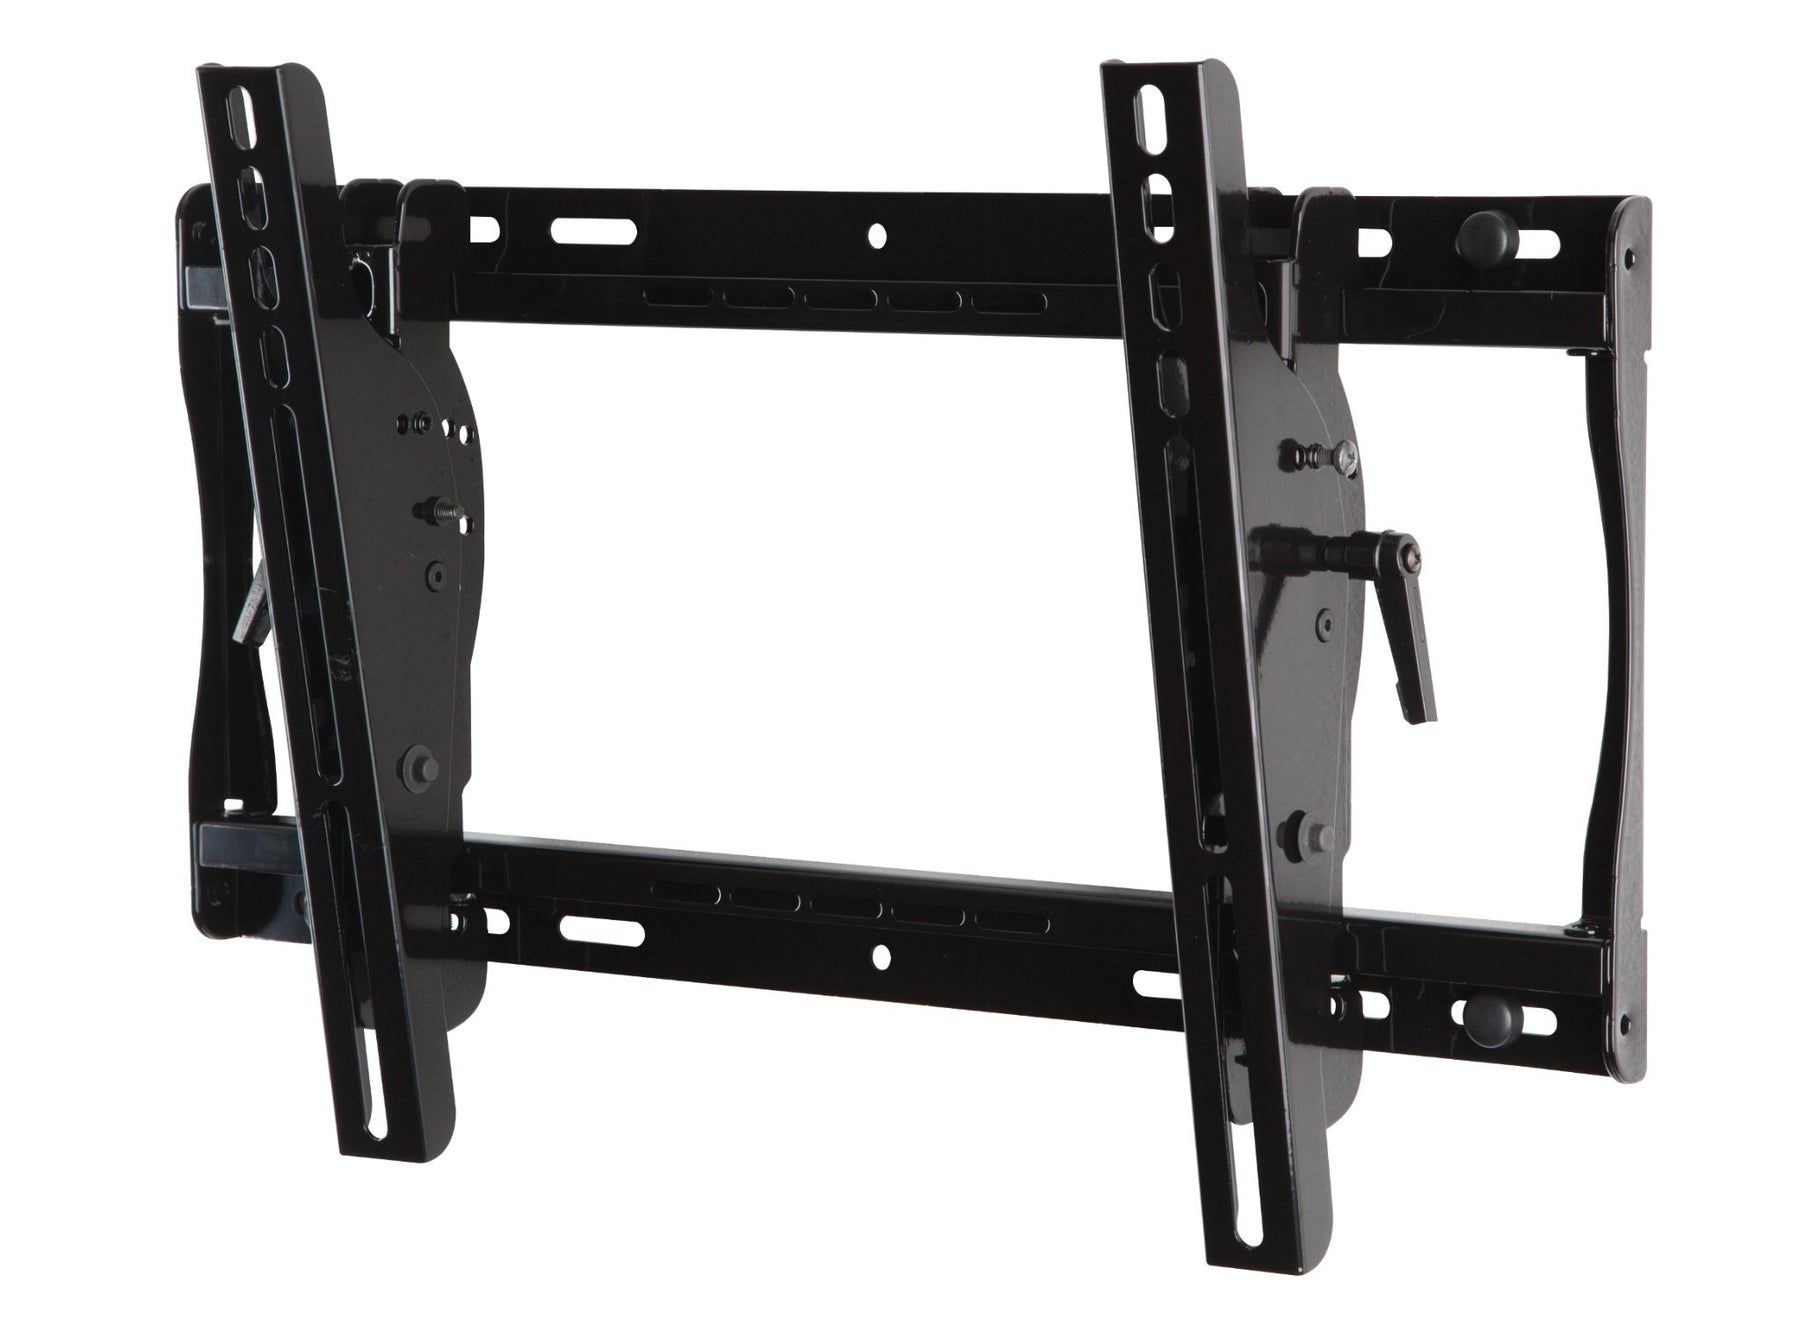 Peerless PARAMOUNT Universal Tilt Wall Mount PT640 - Mounting Kit (Fasteners, Swing Wall Plate) - For LCD Display - Cast Epoxy - Gloss Black - Screen Size: 32"-40"